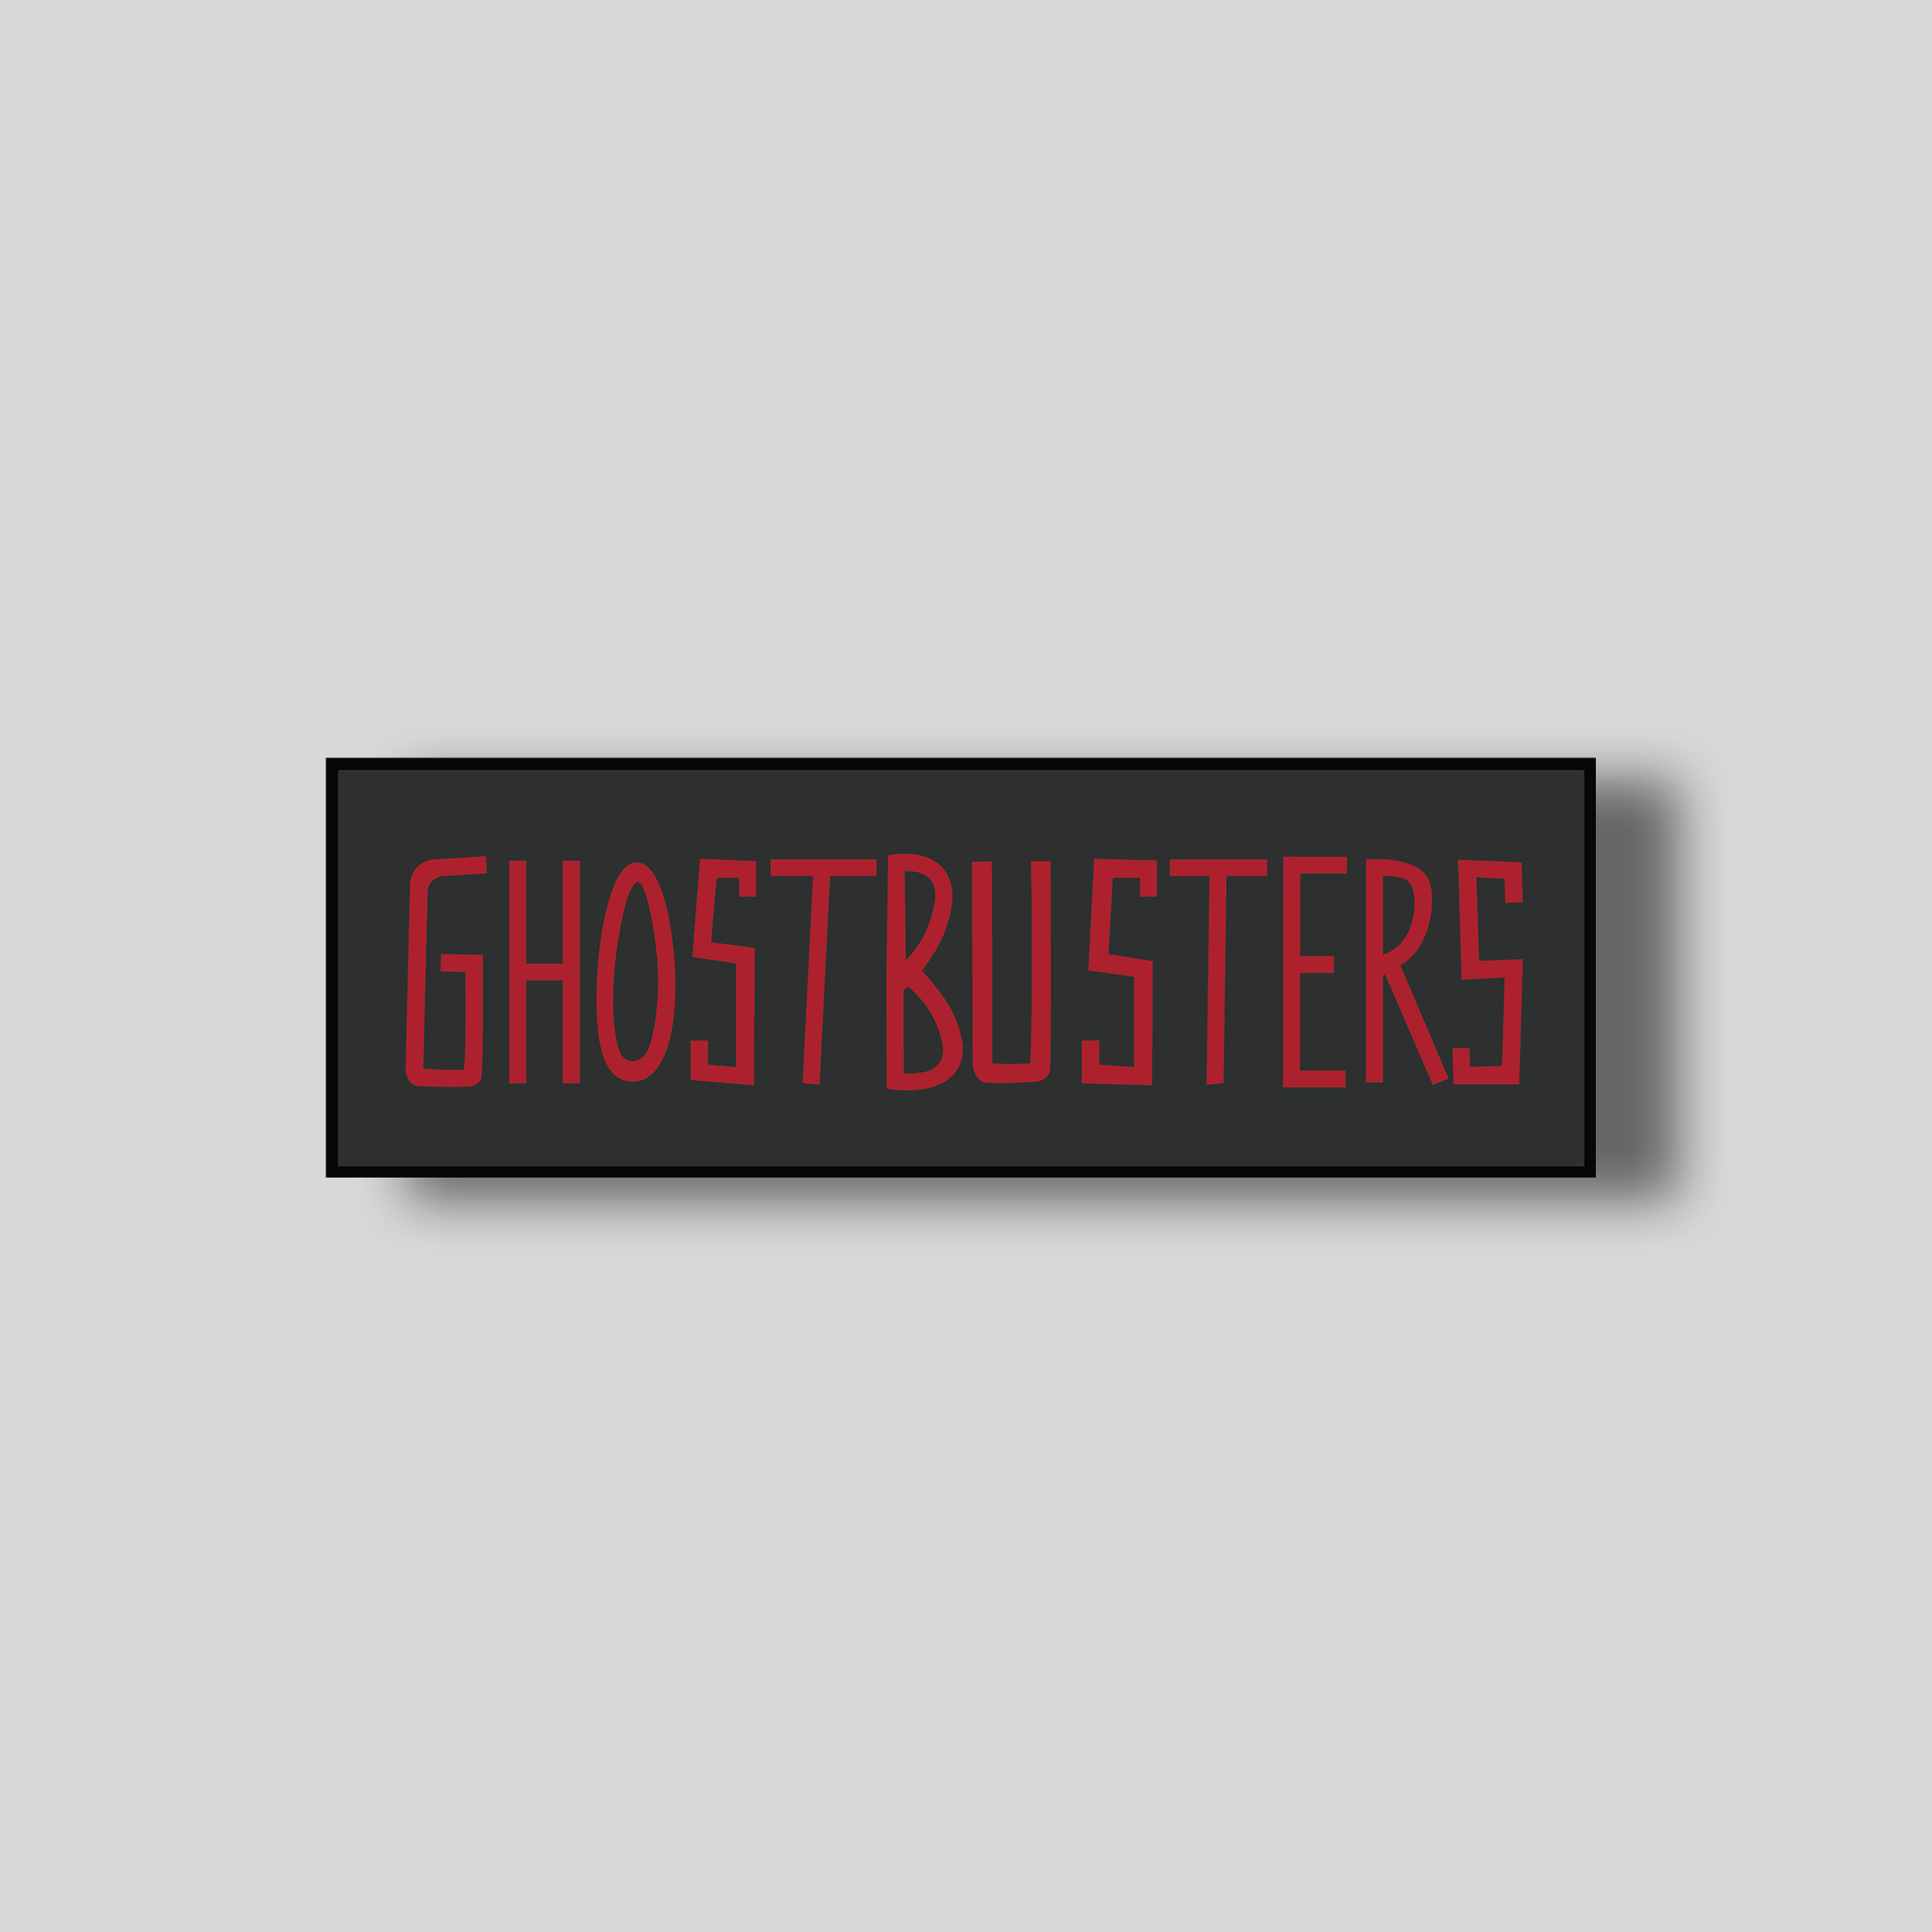 Ghostbusters-ShopifyImages-Patches-GB-R4_30e1e98c-80ee-4c5f-974a-e179e28b3ff3.png